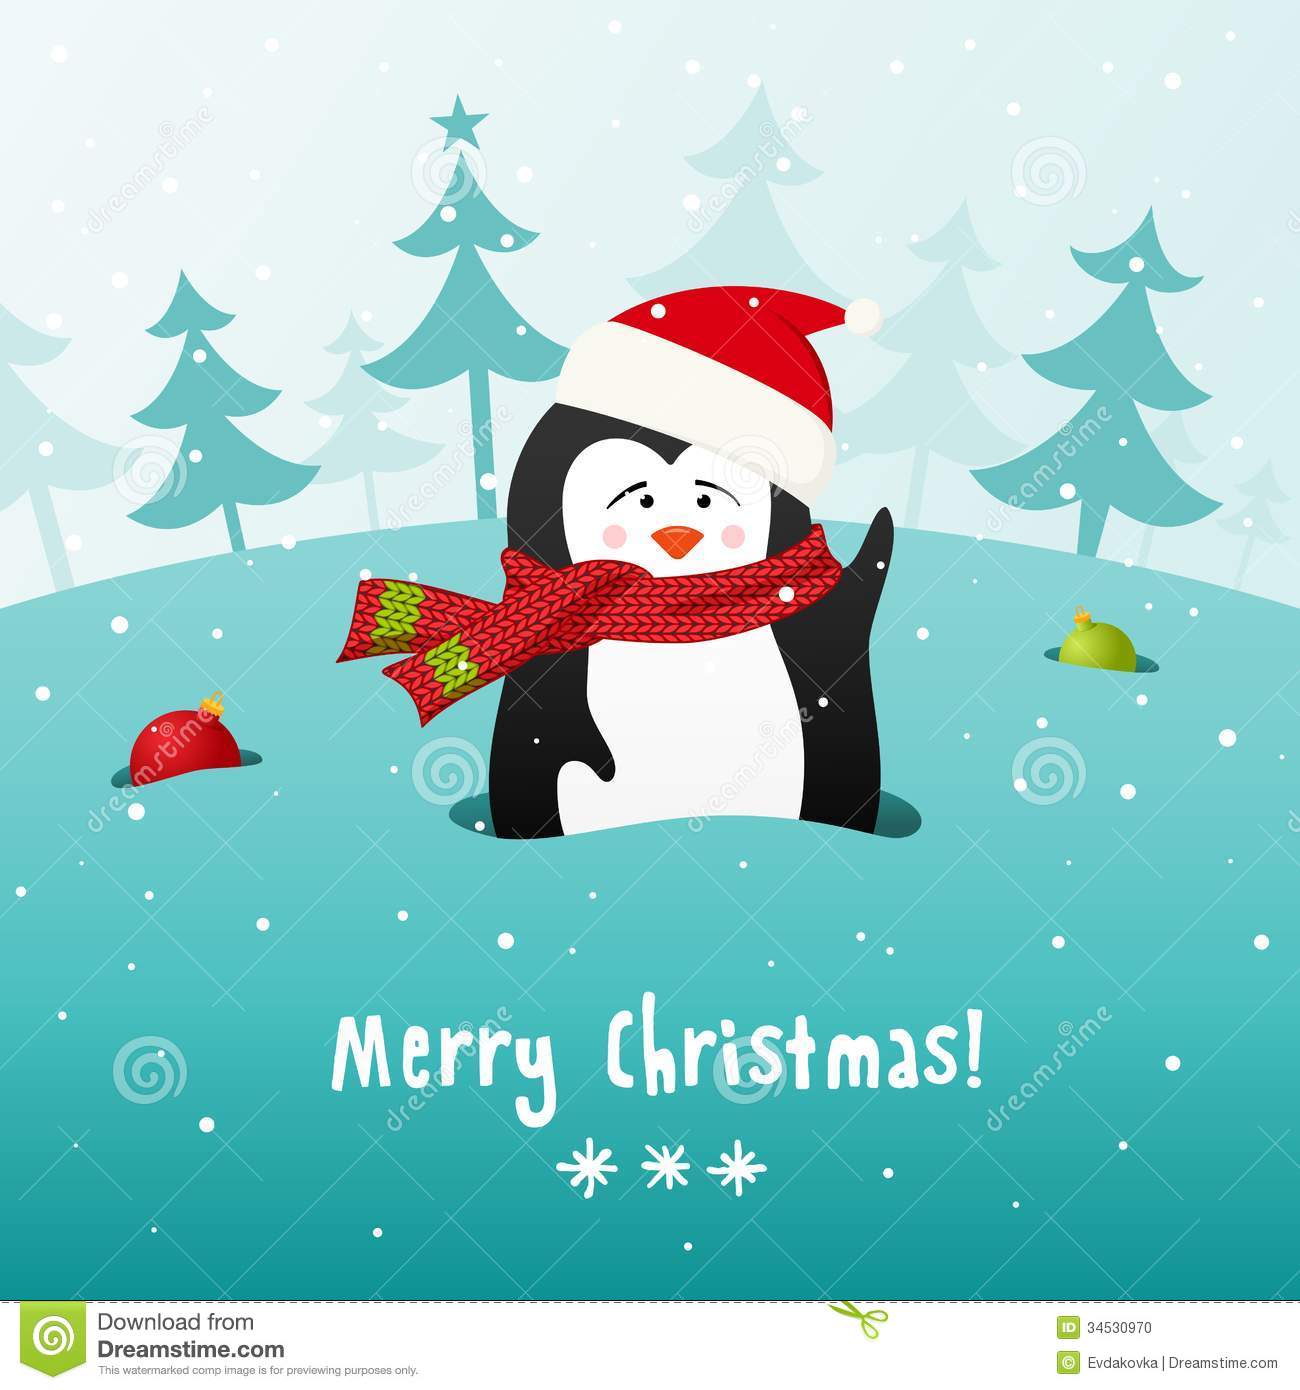 Cute Christmas Penguin Images Pictures   Becuo